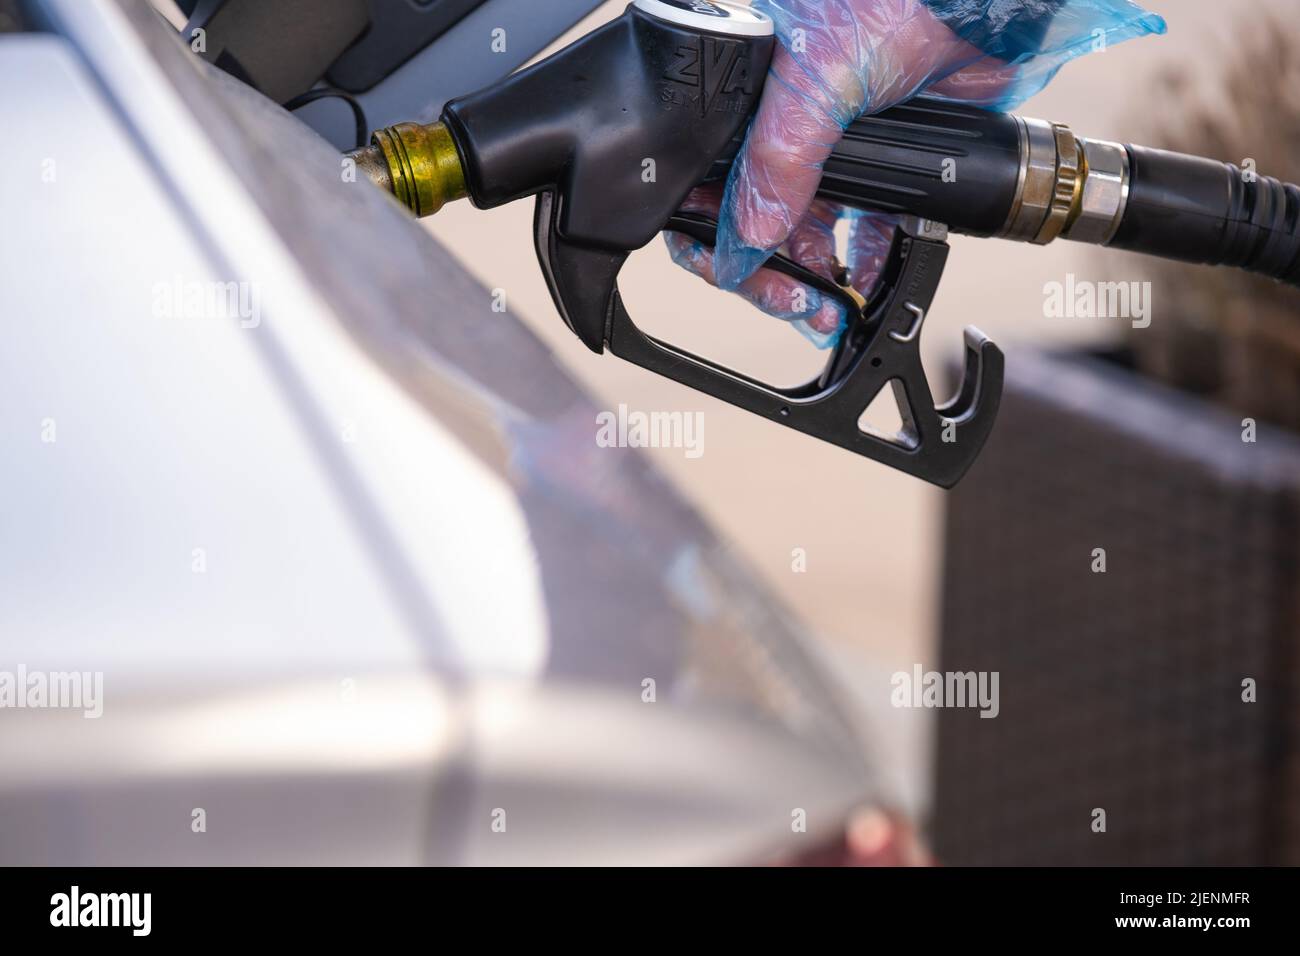 Diesel price in Europe. Refueling the car. pistol in the hands of a man in a blue glove.Car at a gas station. Silver car, refueling pistols .man fills Stock Photo